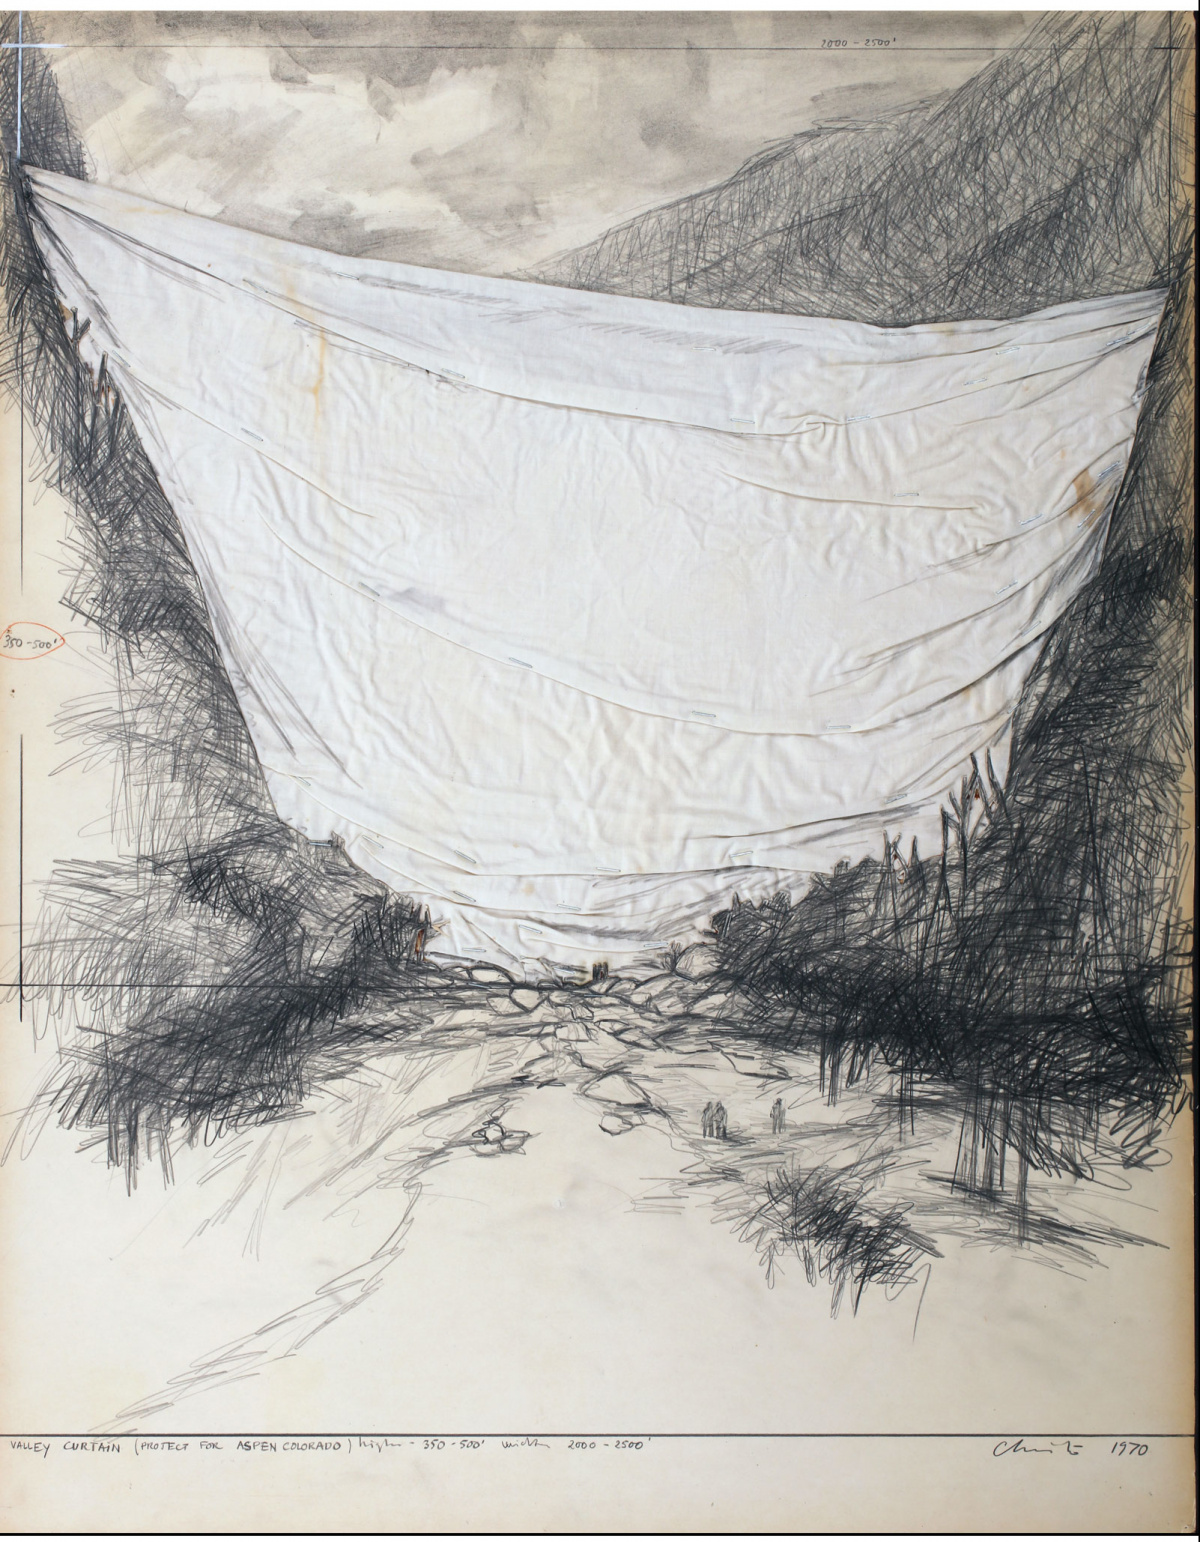 CHRISTO-AND-JEANNE-CLAUDE-Valley-Curtain-(Project-for-Aspen,-Colorado),-1970-Pencil,-fabric,-colored-pencil,-staples-and-charcoal-28-x-22-in-(CJC-011)